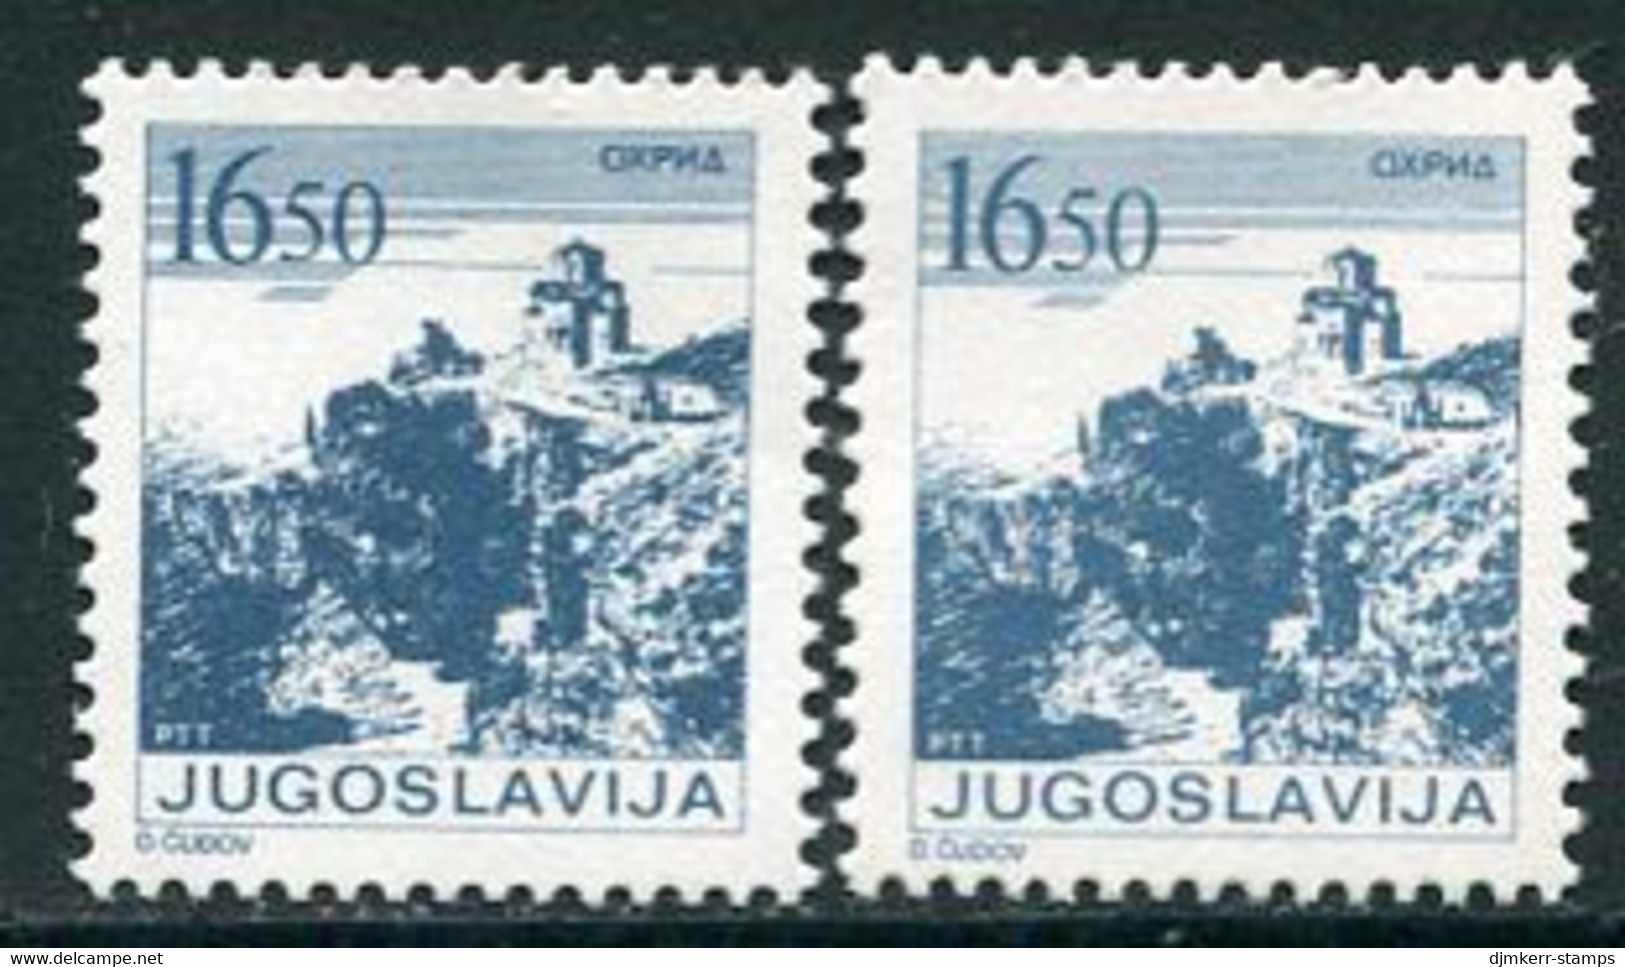 YUGOSLAVIA 1983 Towns Definitive 16.50 D. Both Perforations MNH / **.  Michel 1995A,C - Unused Stamps